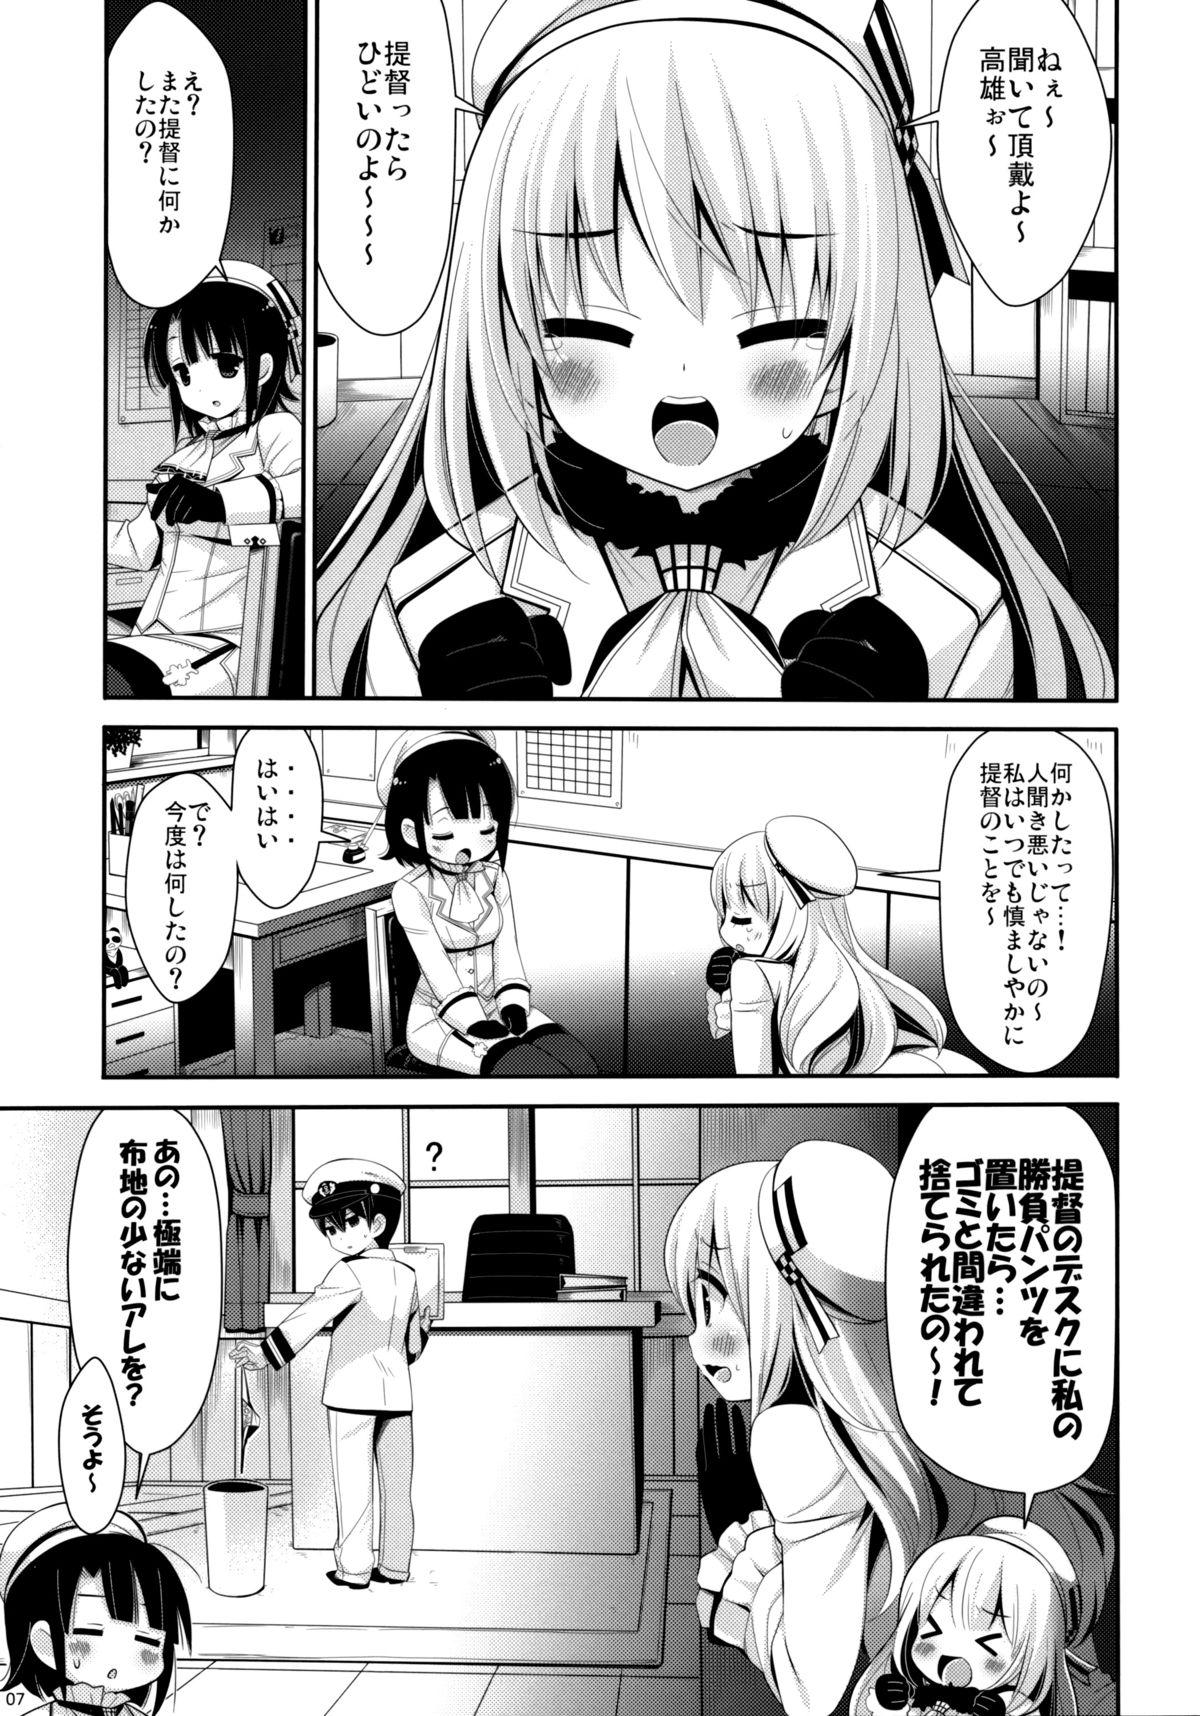 Fucked AT&T - Kantai collection Ex Girlfriends - Page 7